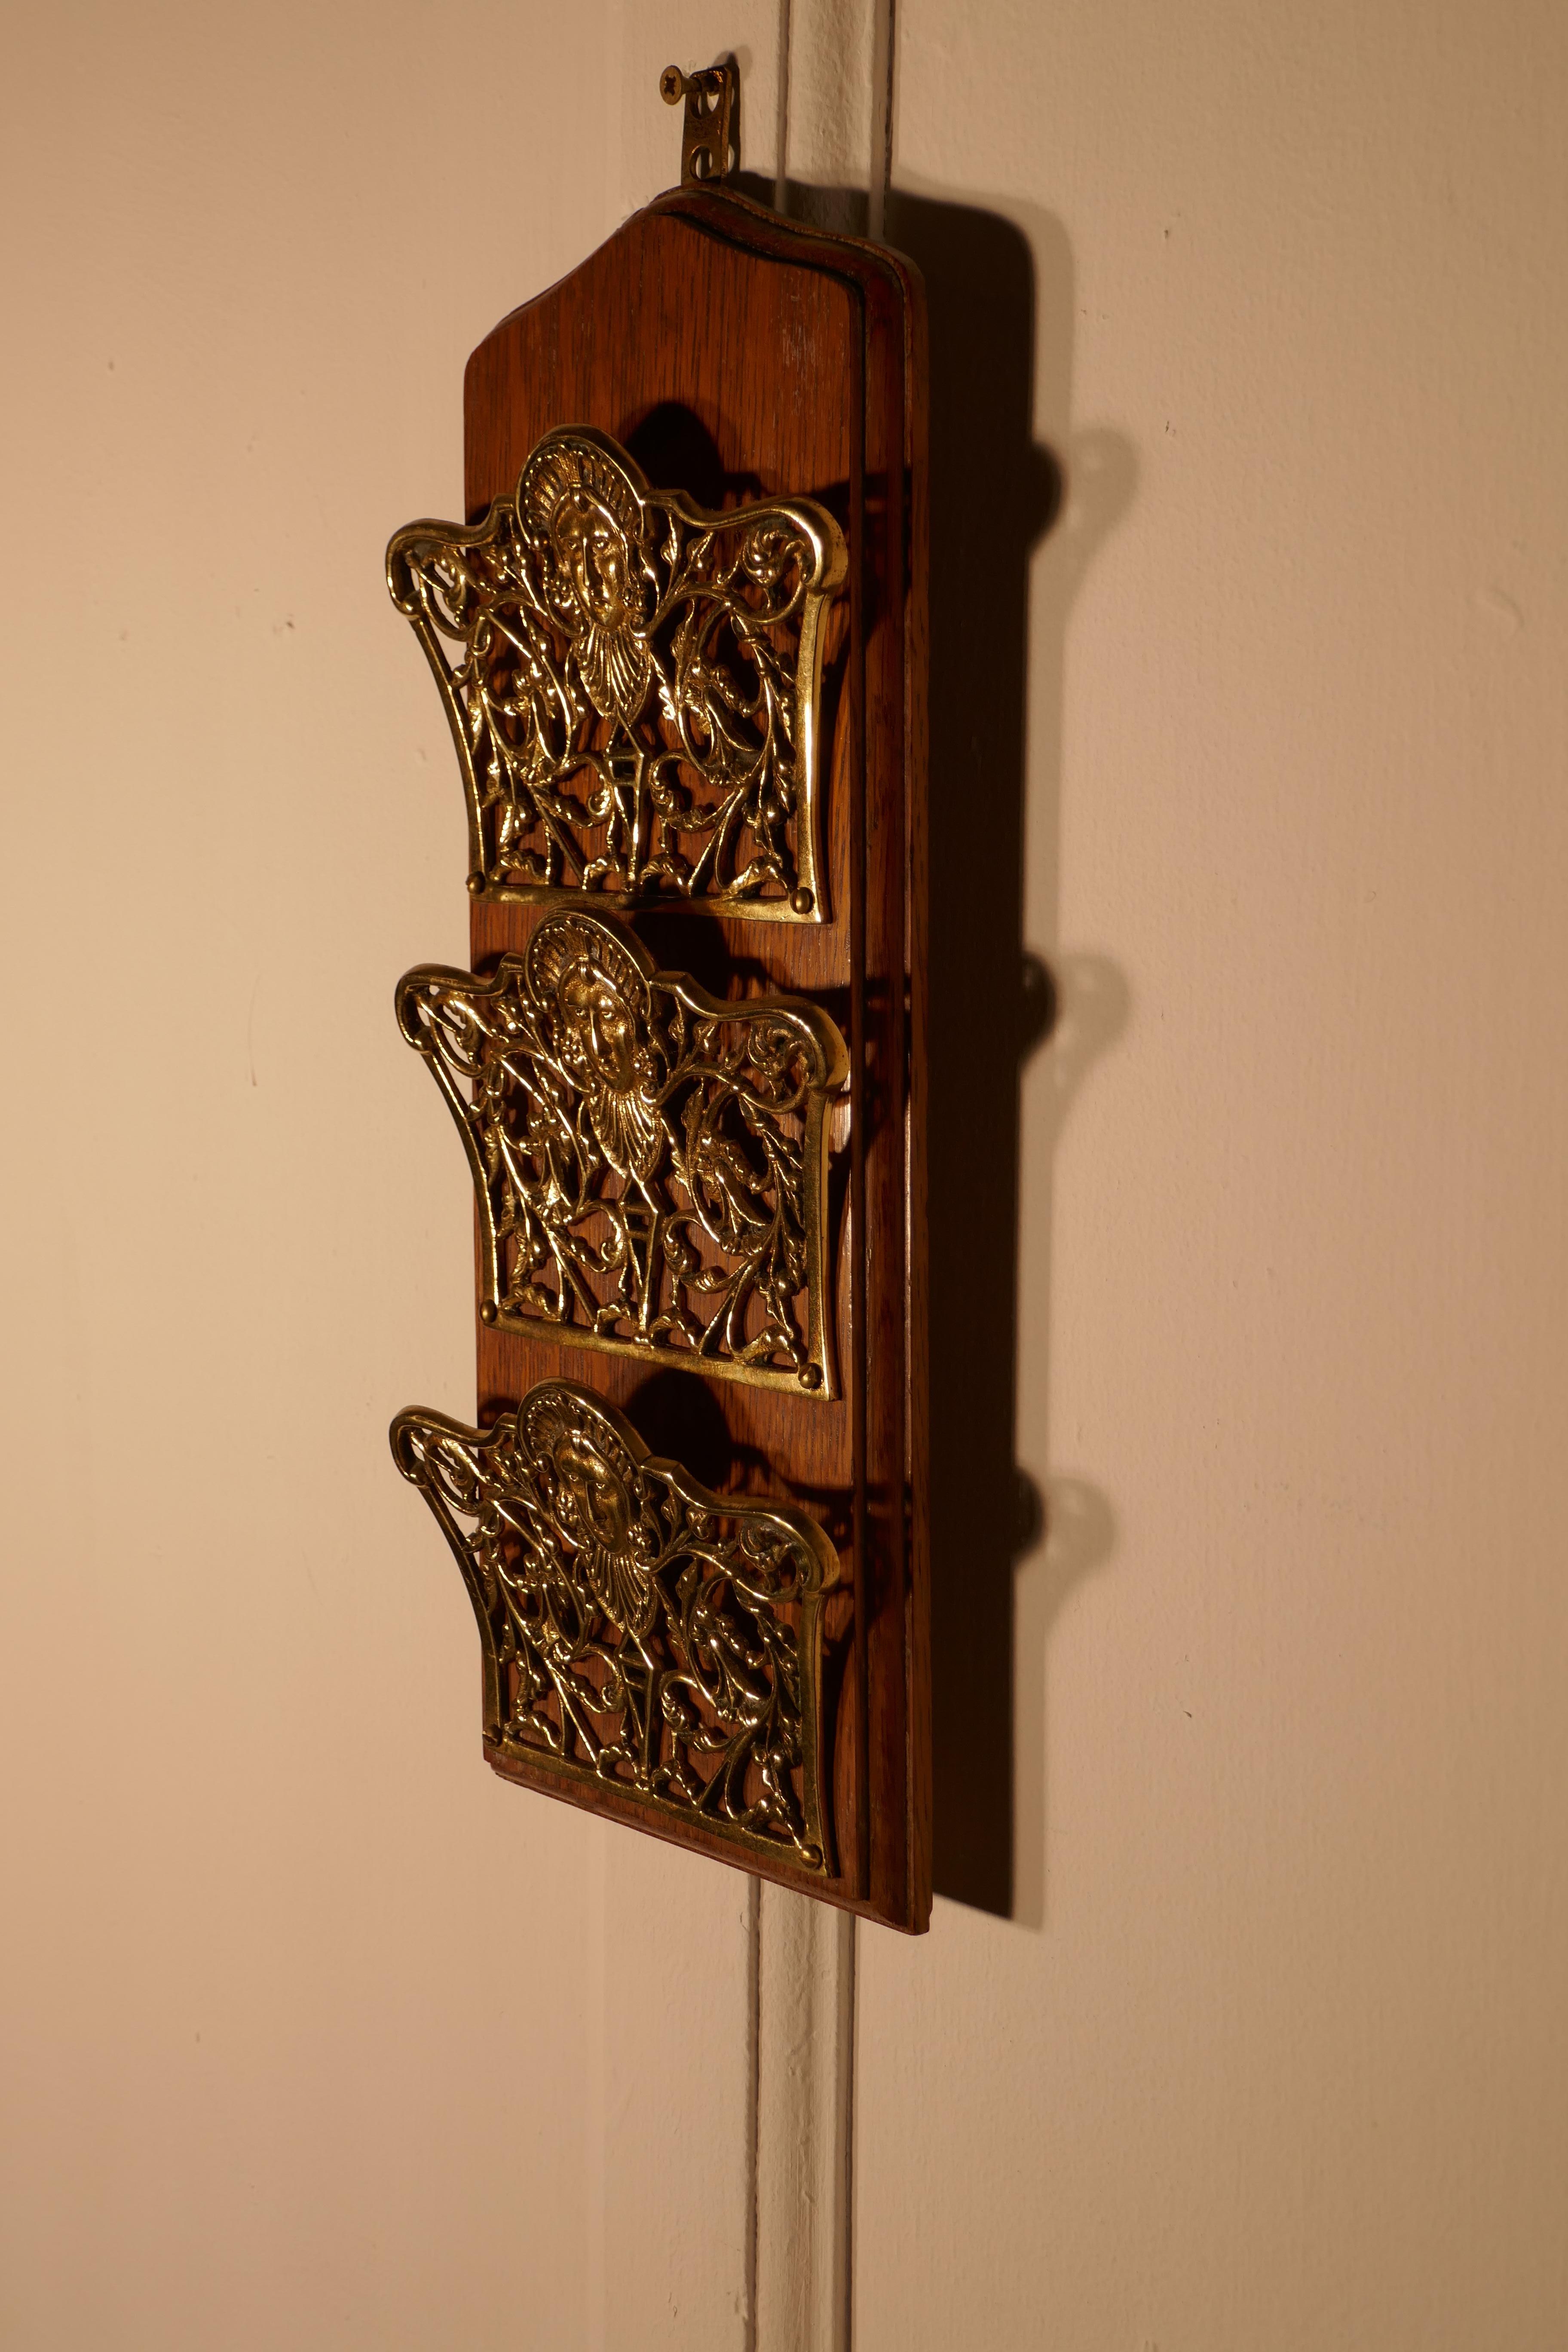 French Art Nouveau brass and oak wall hanging letter rack

3 pierced letter holders set on Oak, the brass is in the Art Nouveau style with faces of caryatid and floral decoration
This lovely and useful piece once a necessity in any reception hall